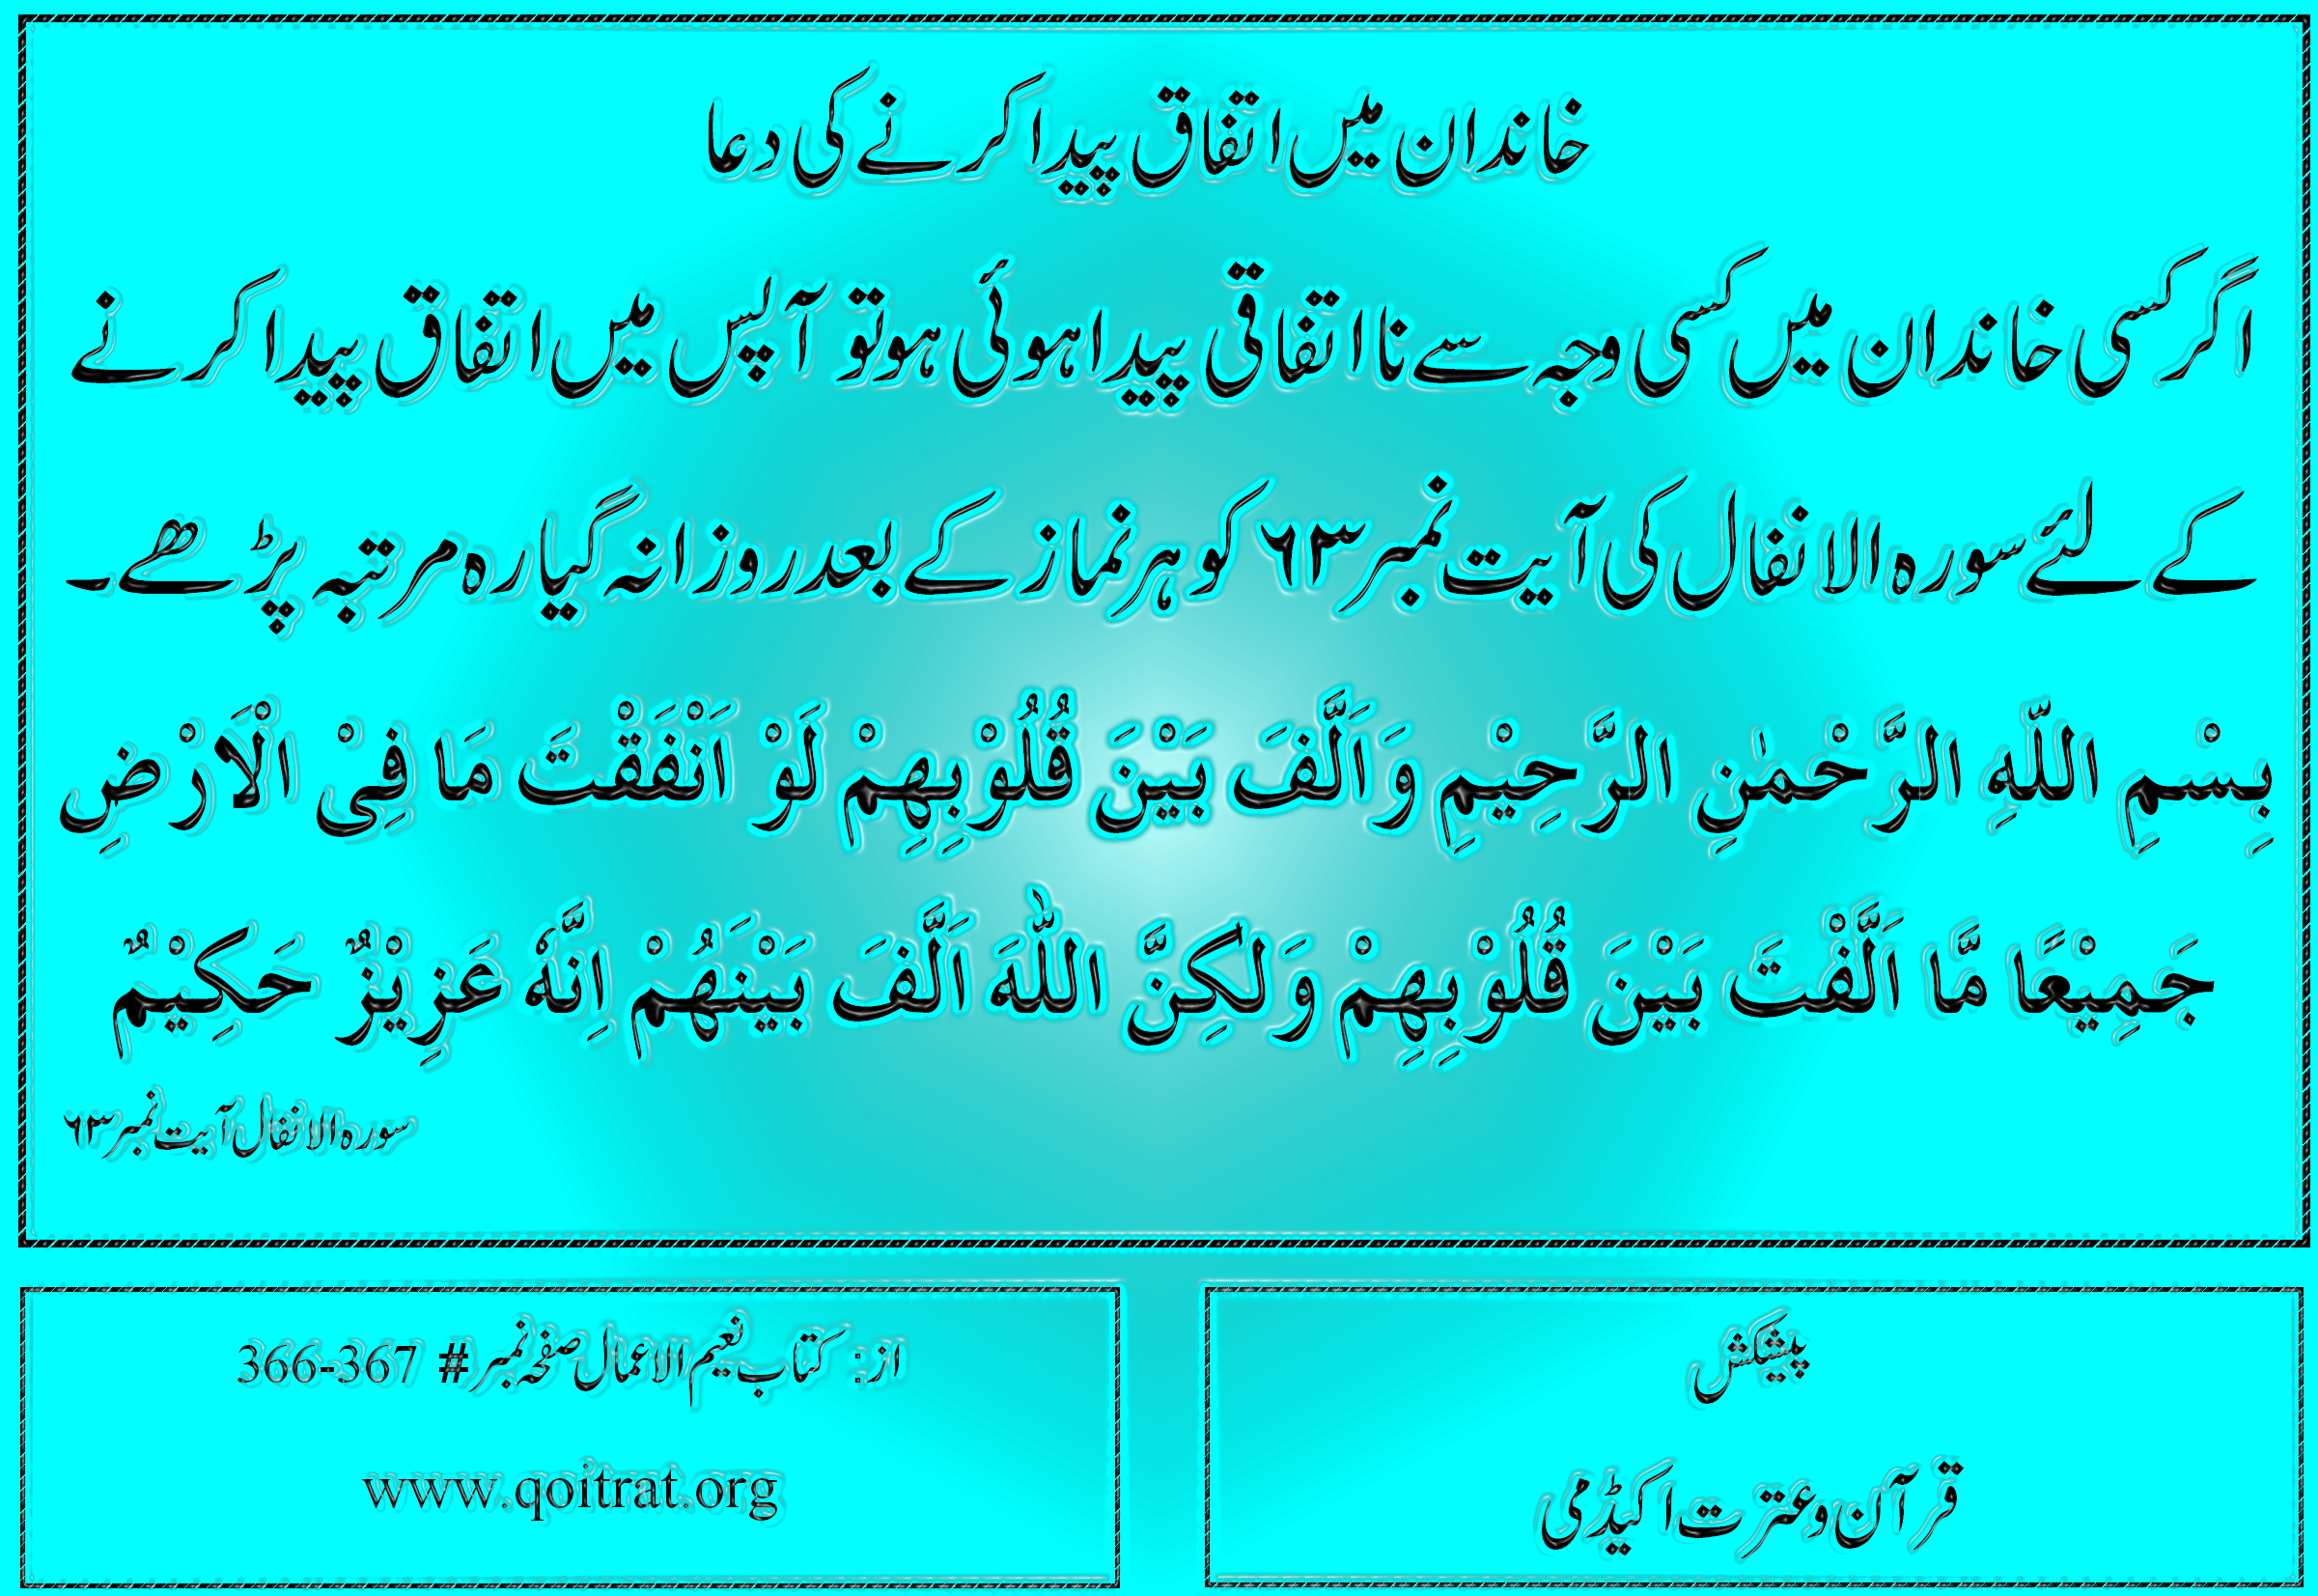 Wazifa of the day